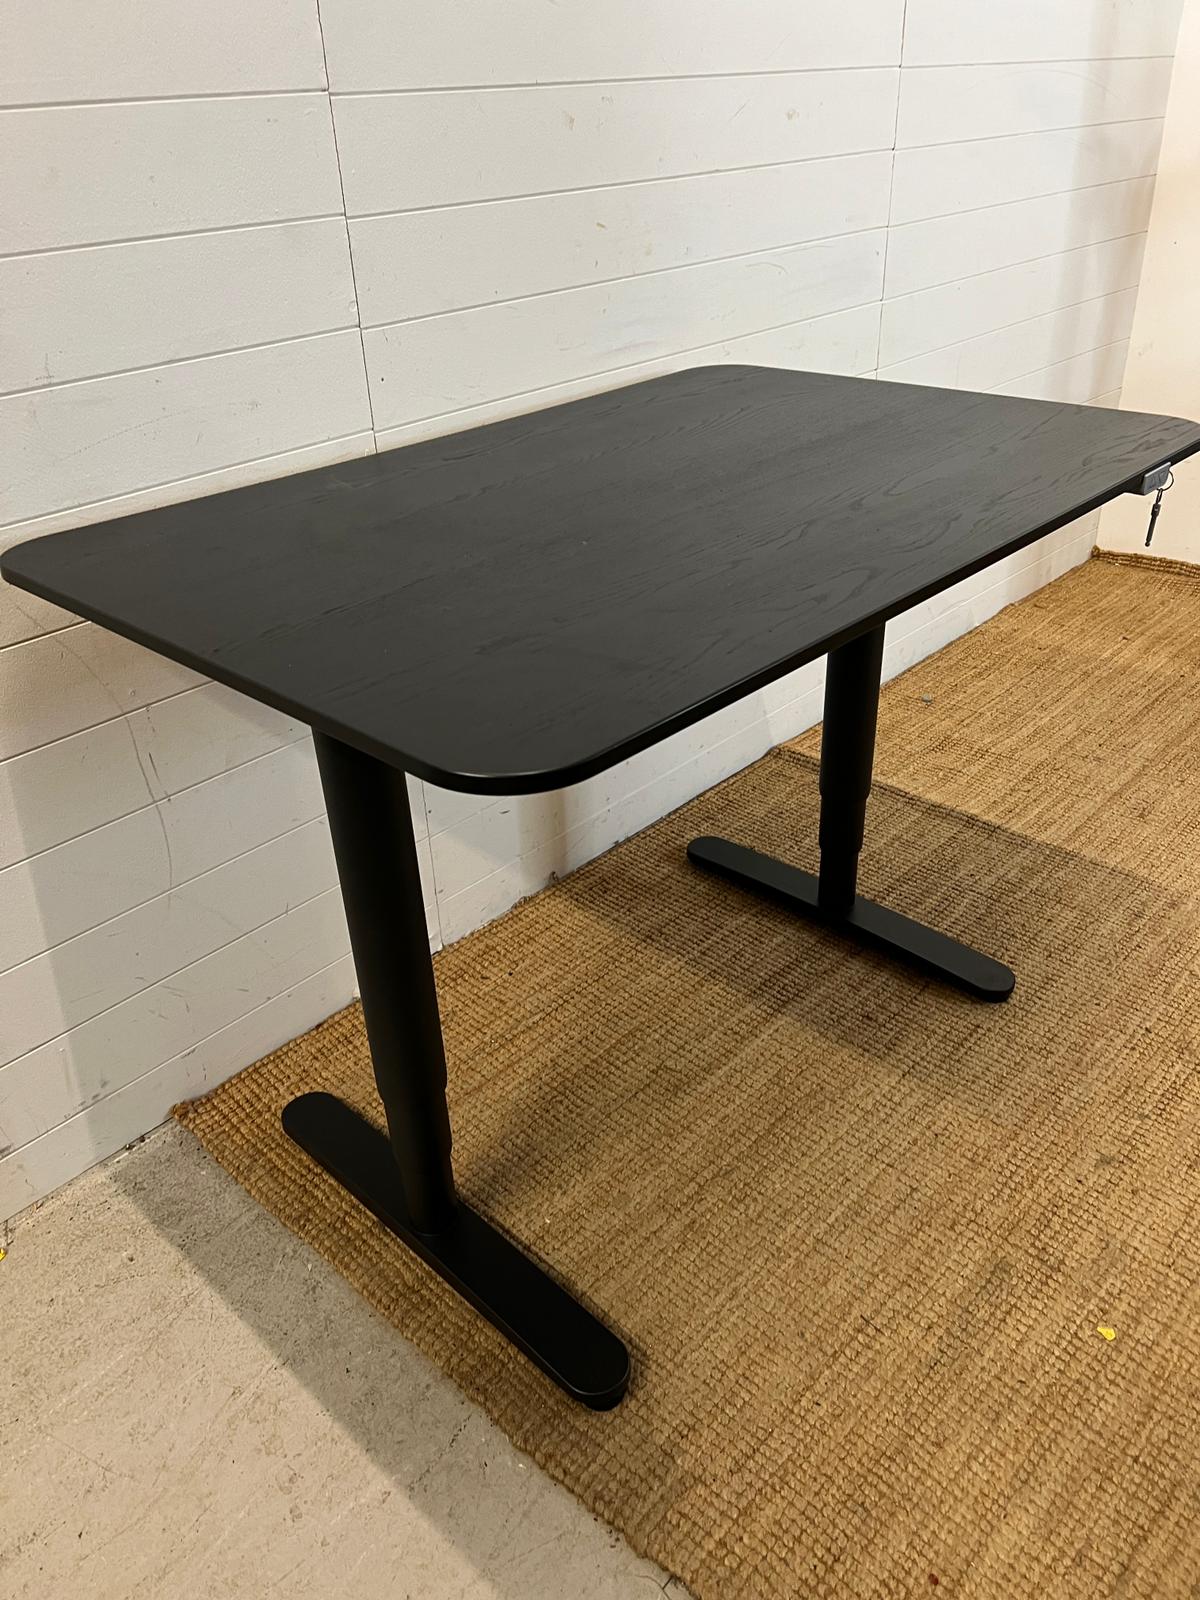 A Bekant Ikea desk with adjustable height (W120cm D80cm) - Image 3 of 6